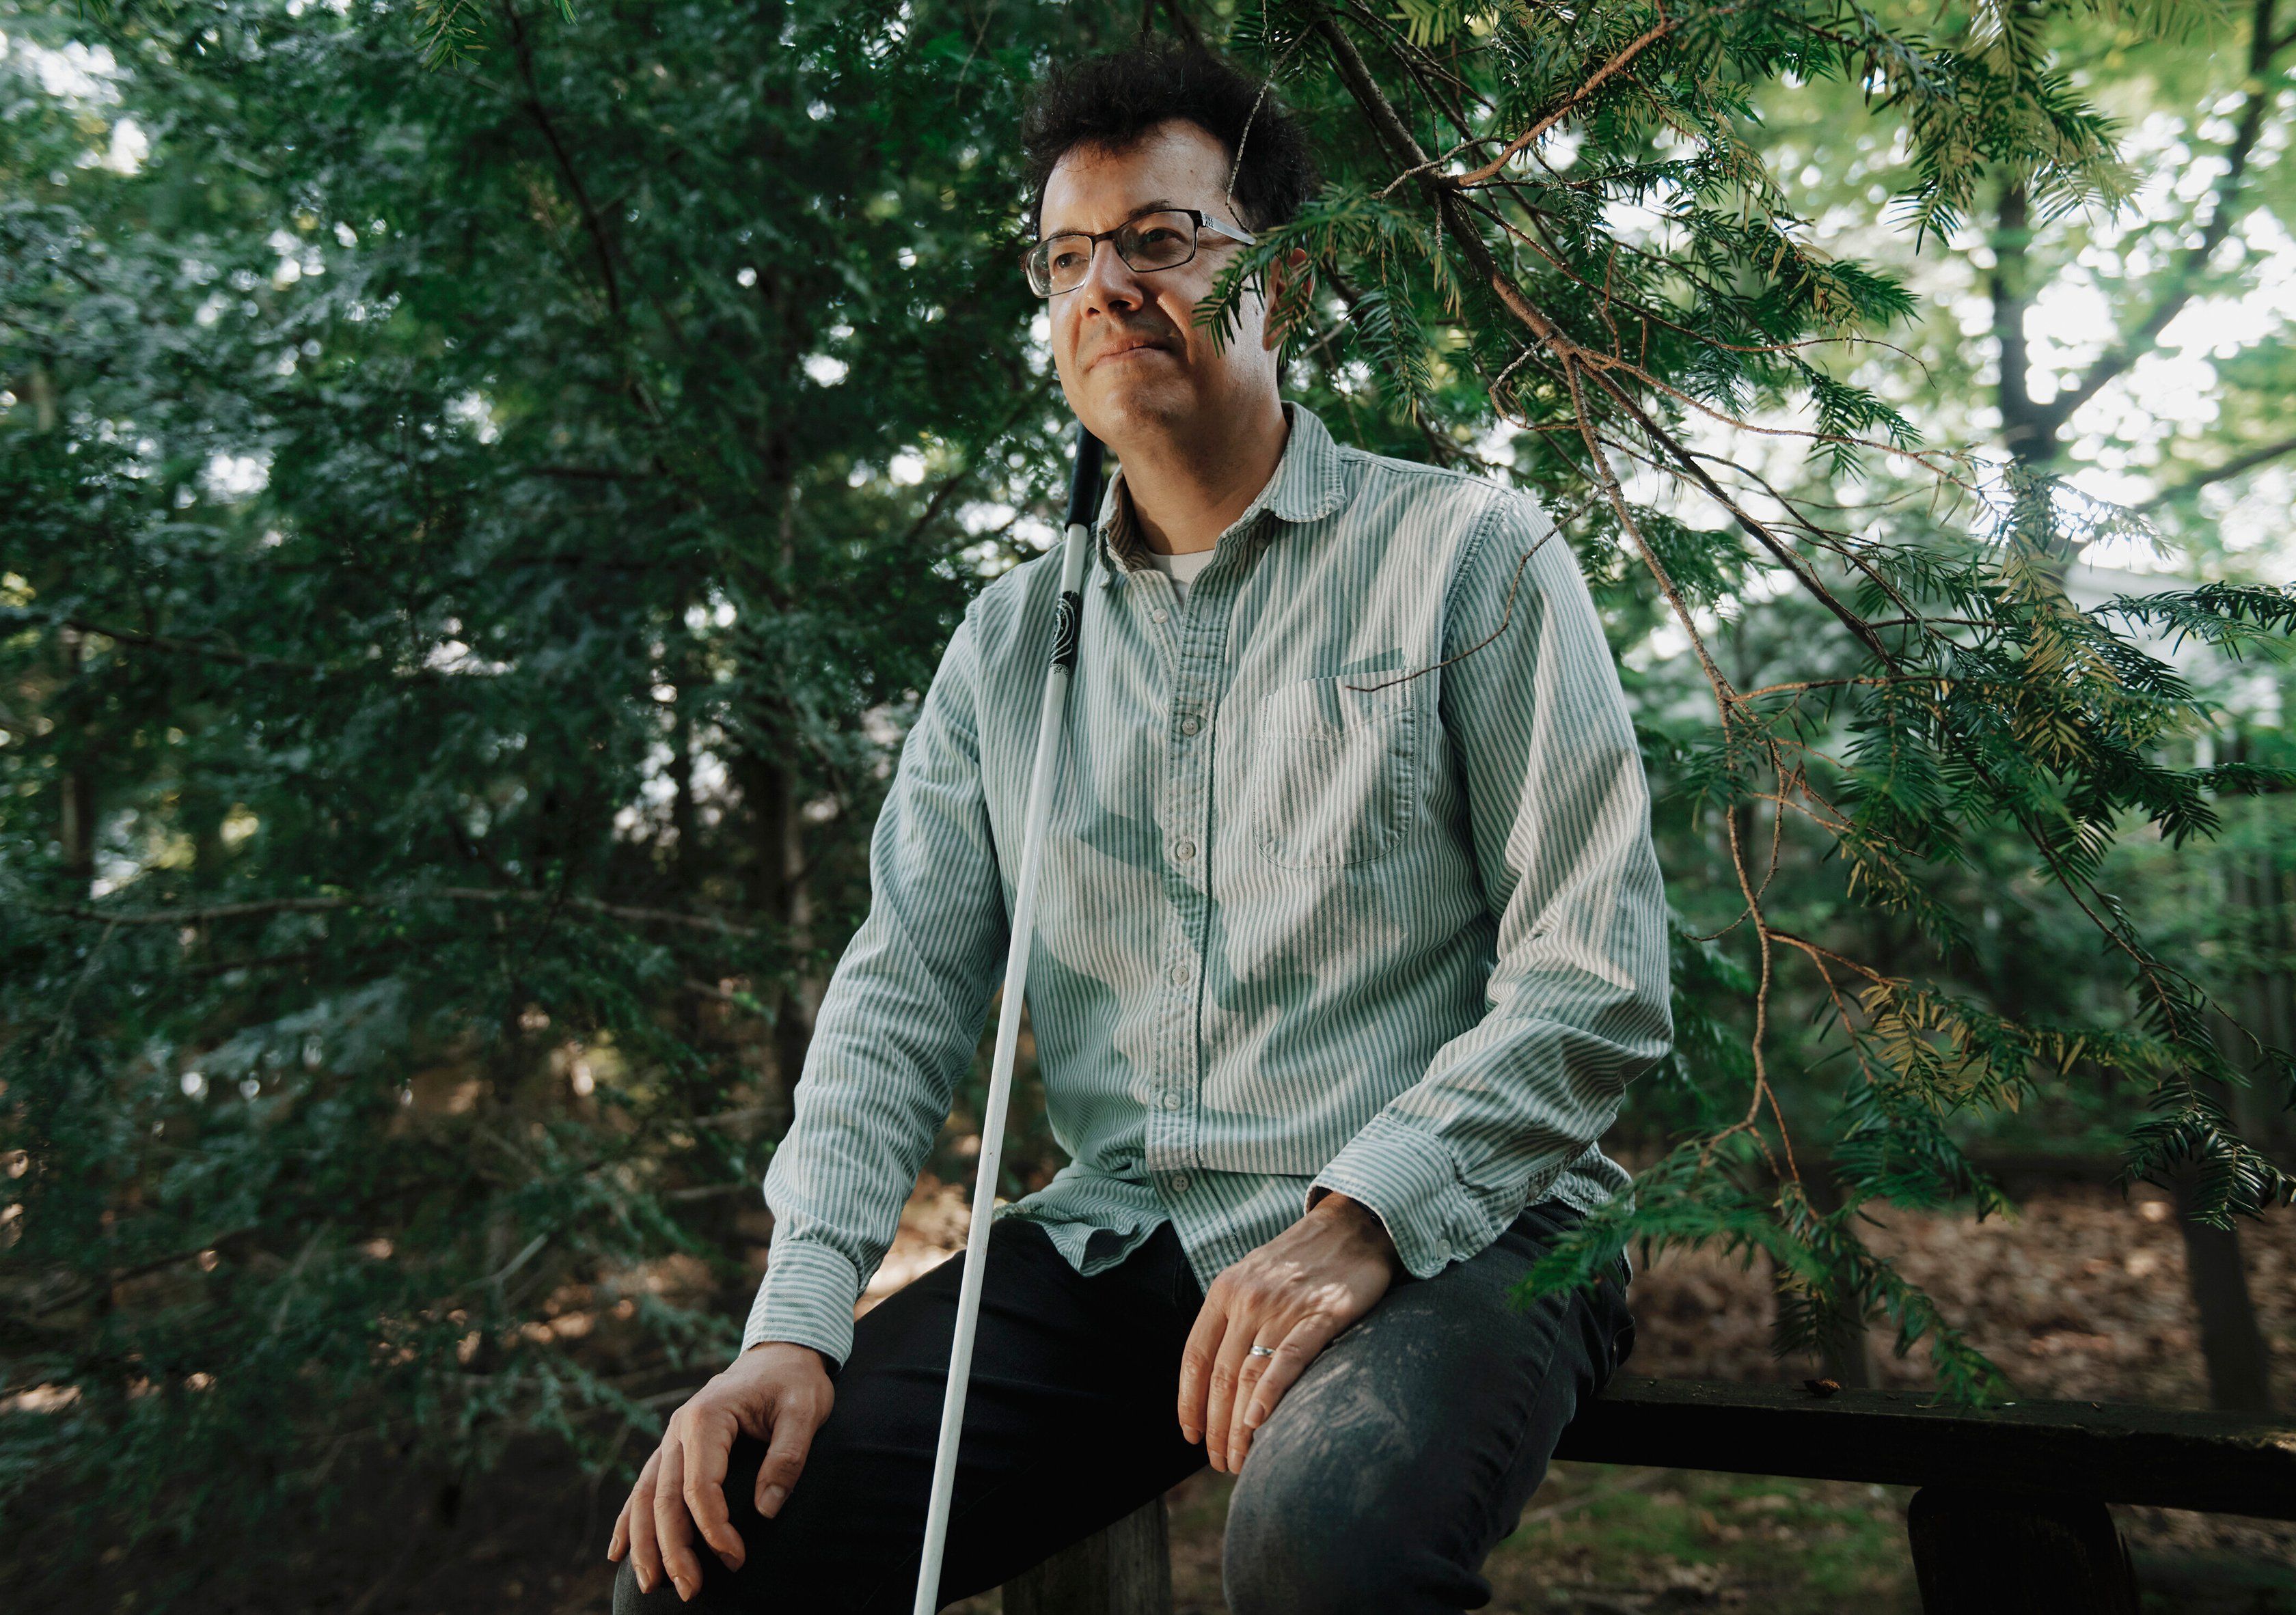 A dark haired man in glasses looks off into the distance. He sits on an outdoor bench with lush green trees behind him. A white cane rests vertically against his chest.